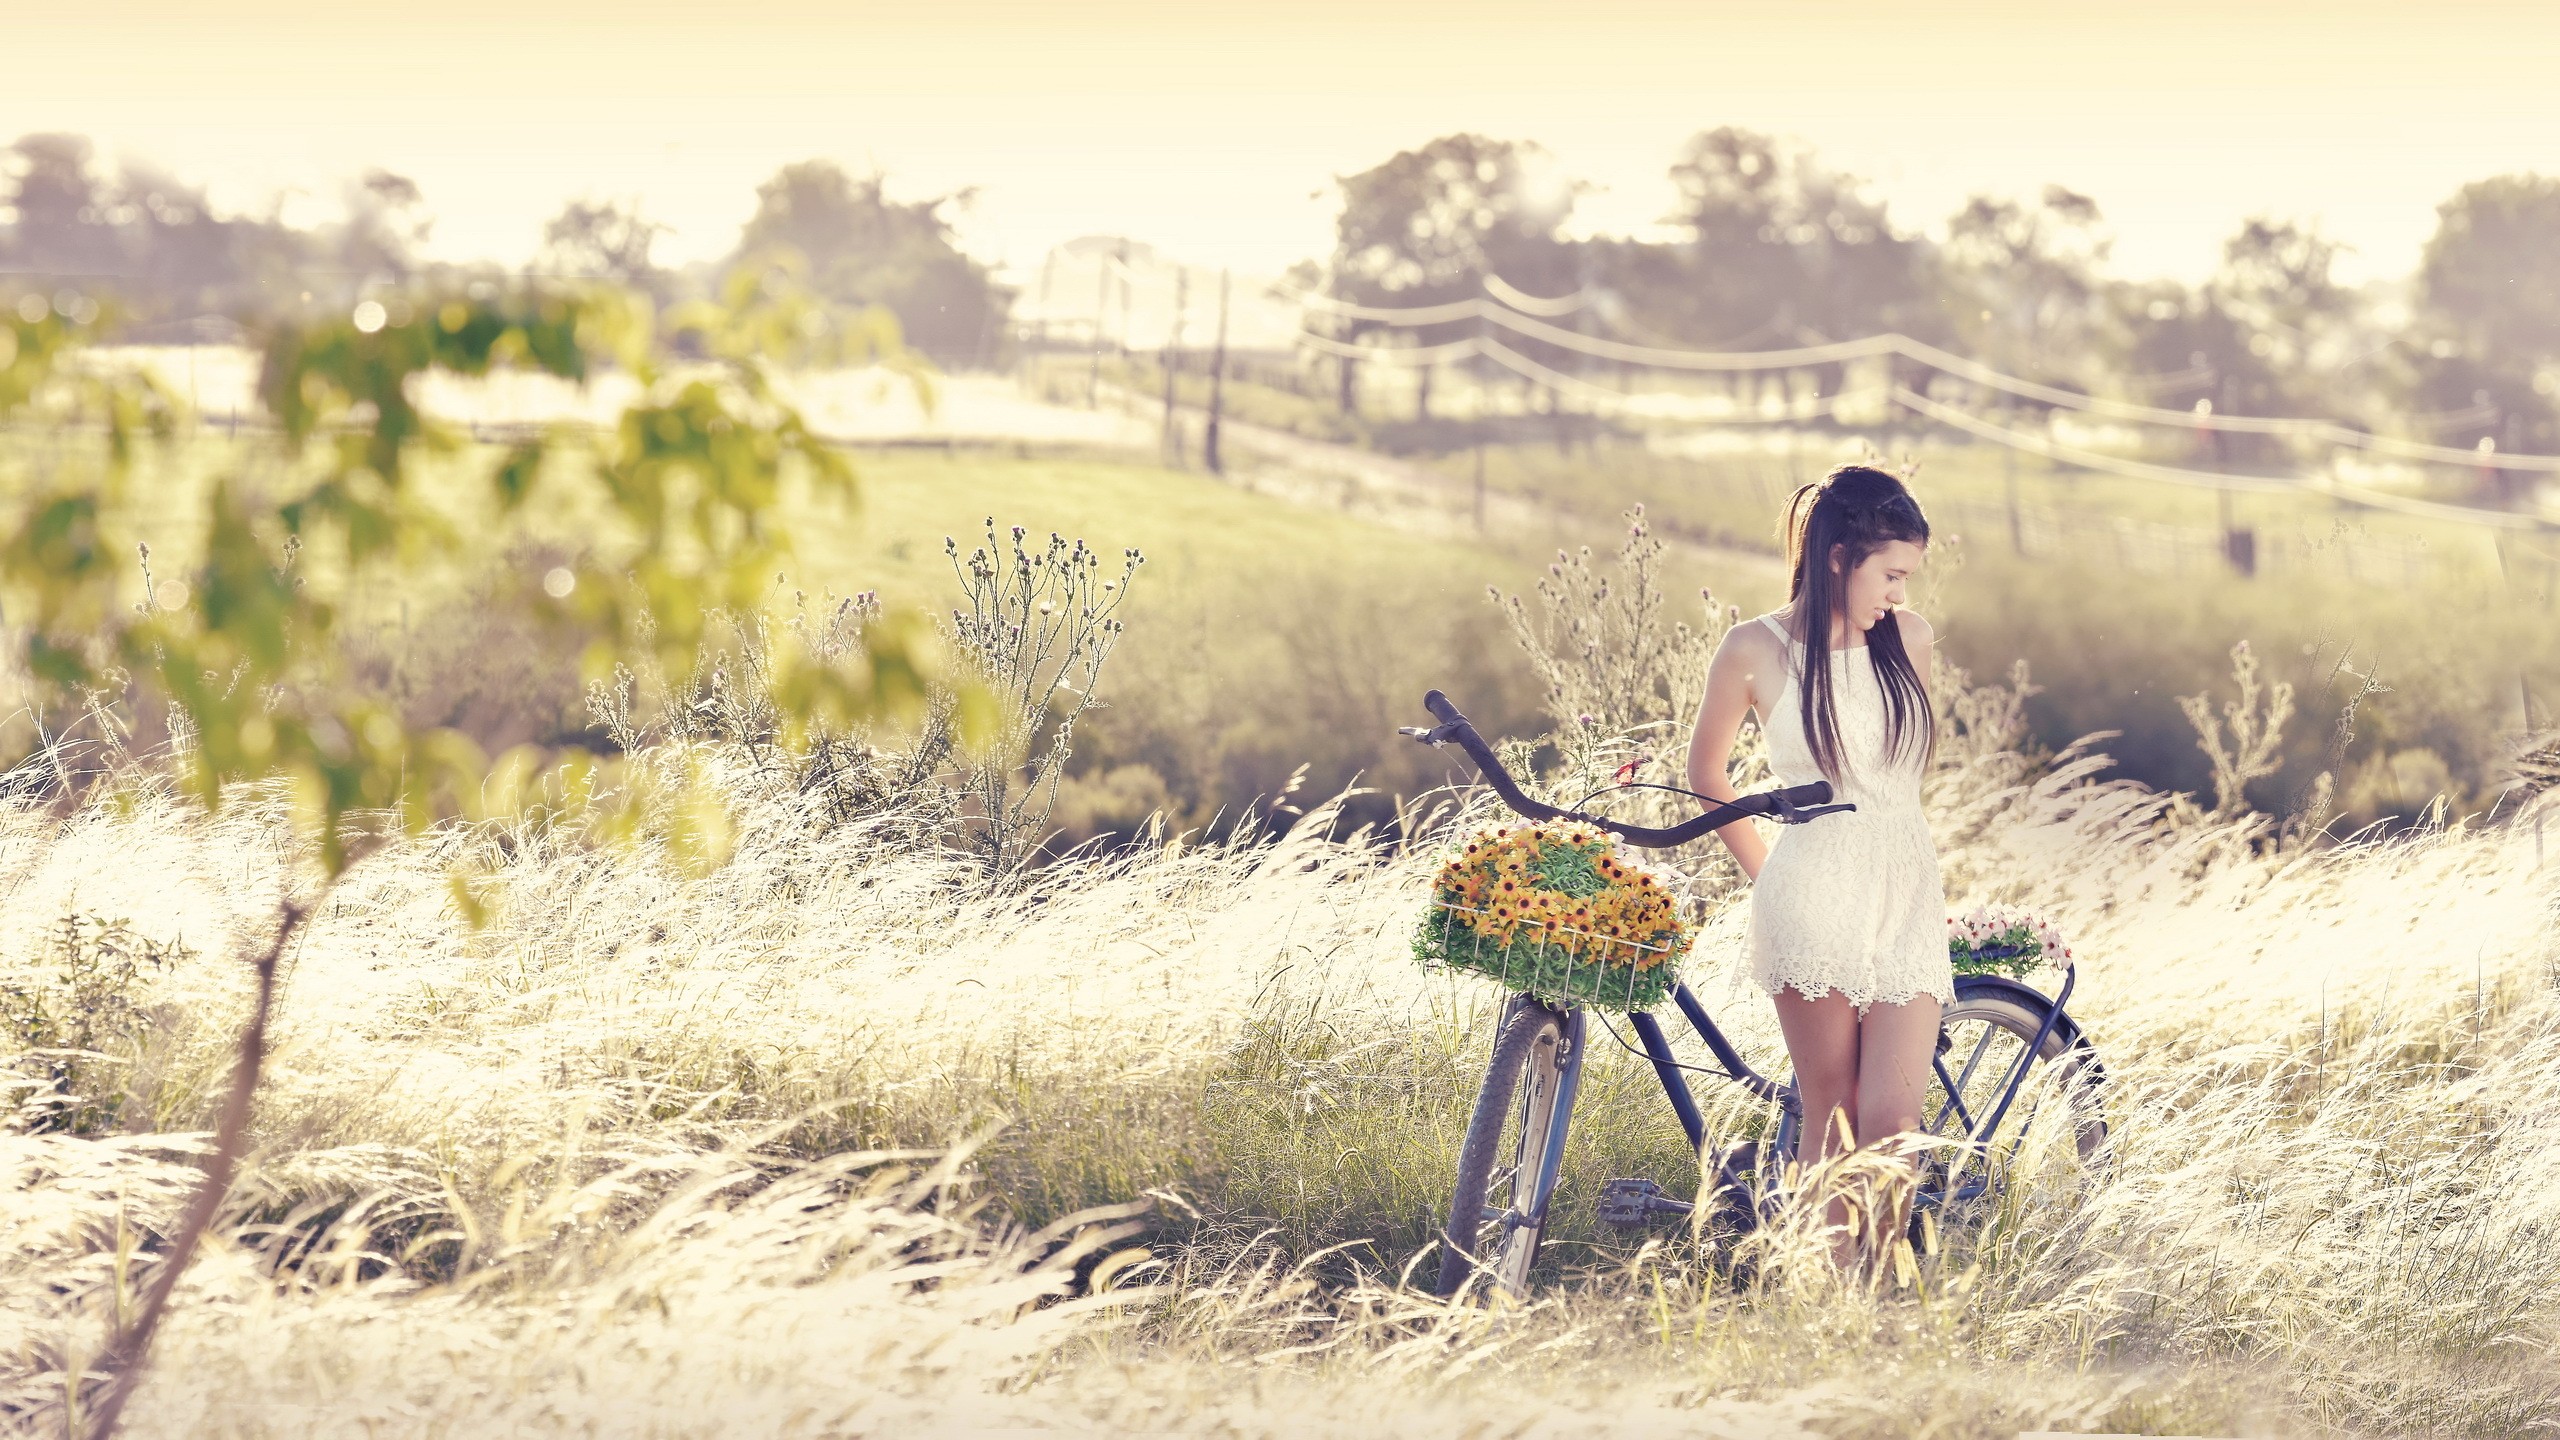 Women Outdoors Women With Bicycles Model Nature Bicycle 2560x1440